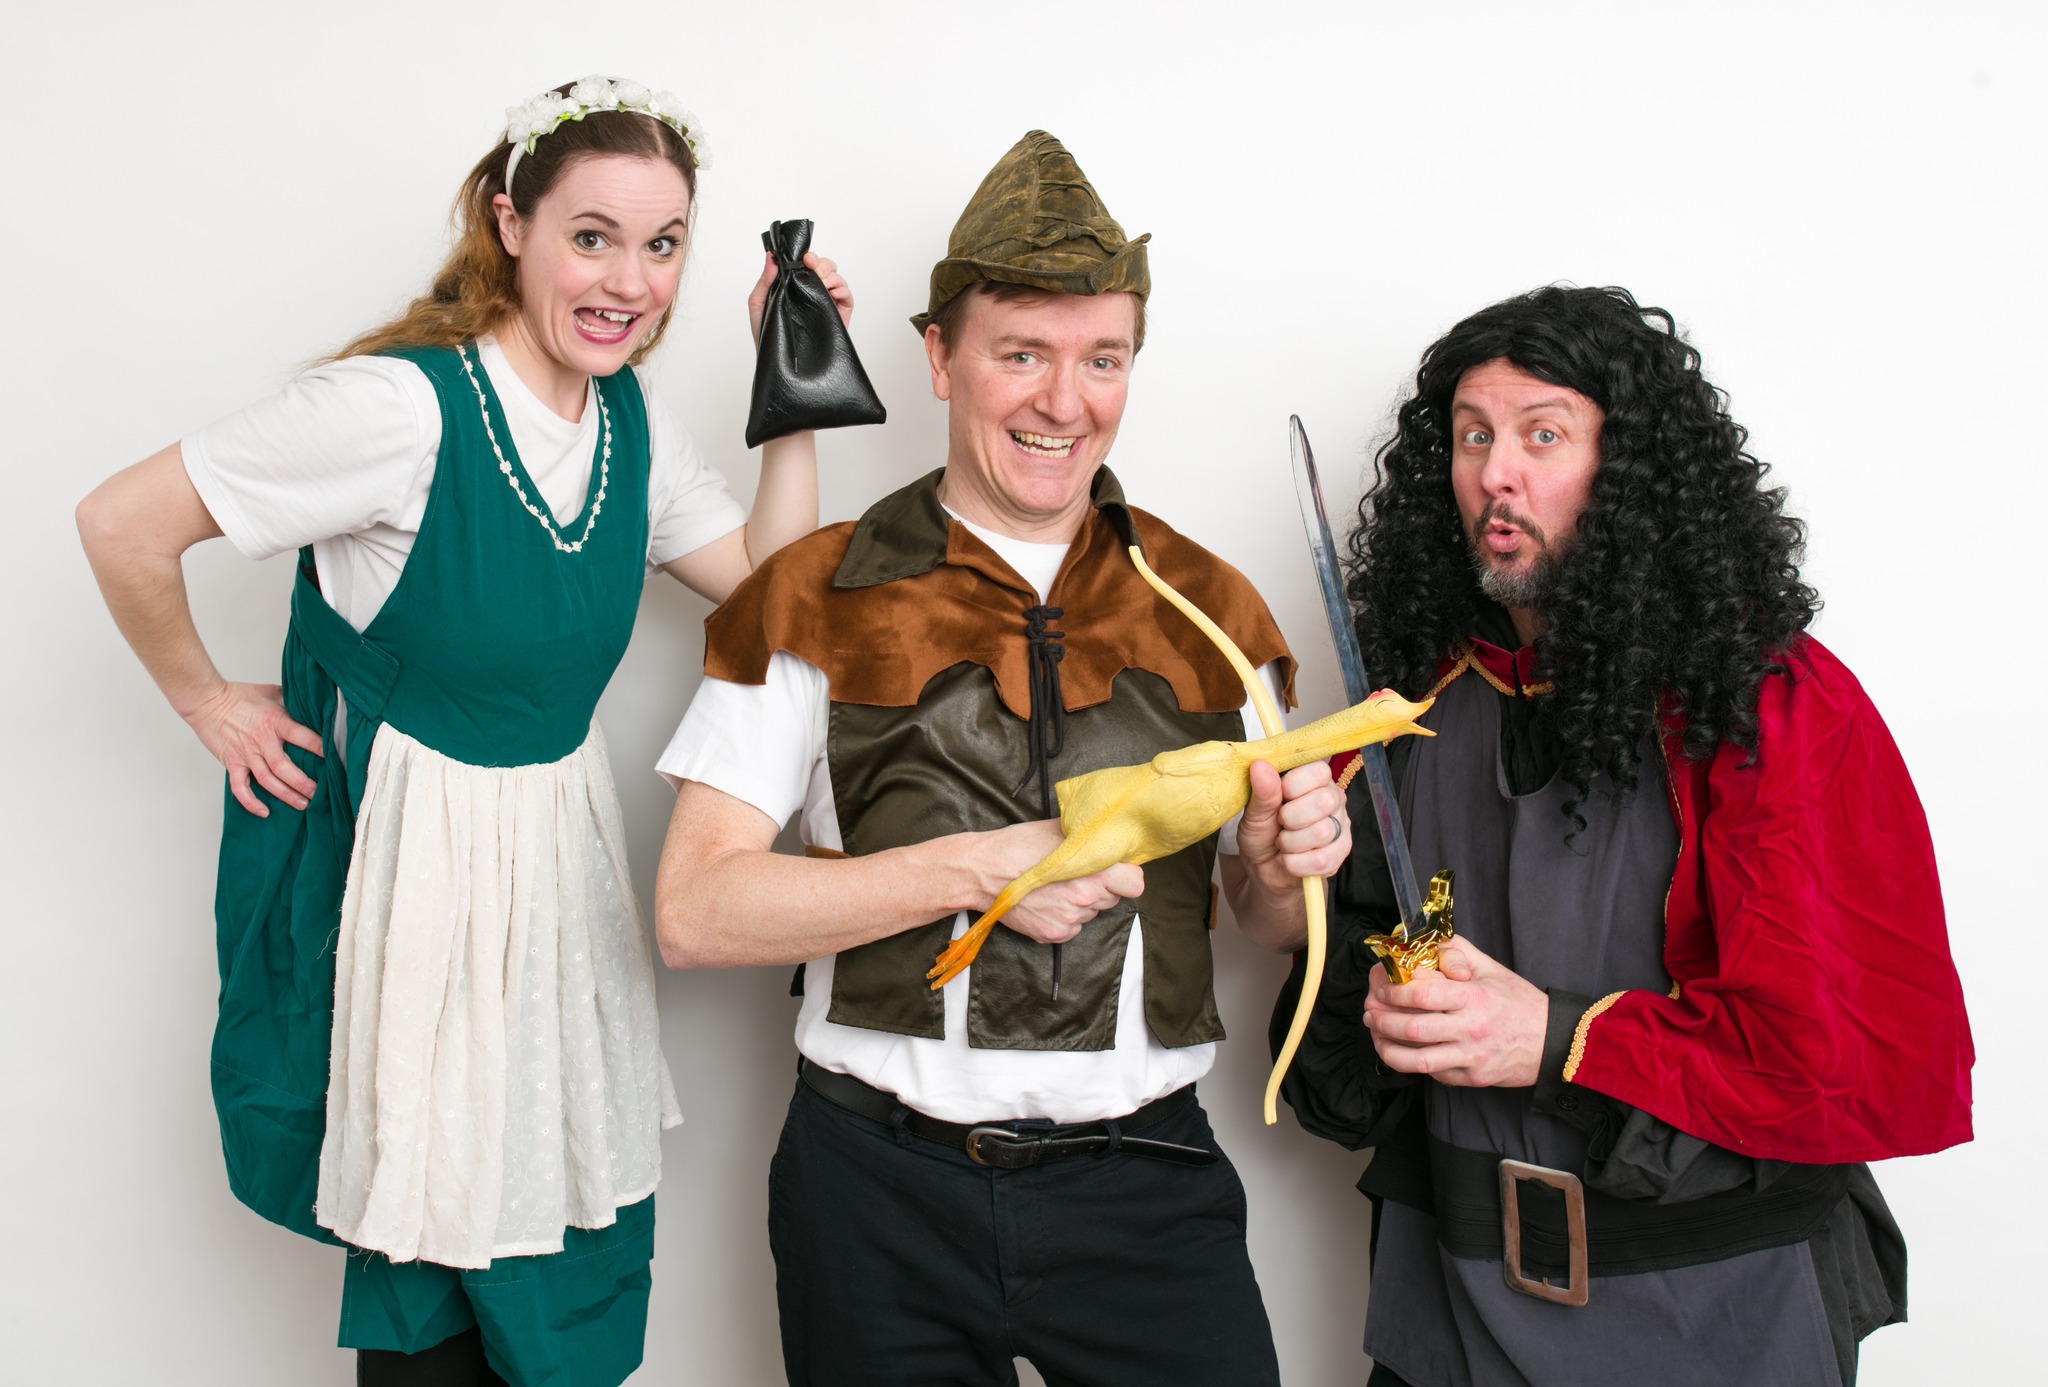 Actors from Robin Hood dressed as Maid Marion, Robin Hood, and the Sherif of Nottgham